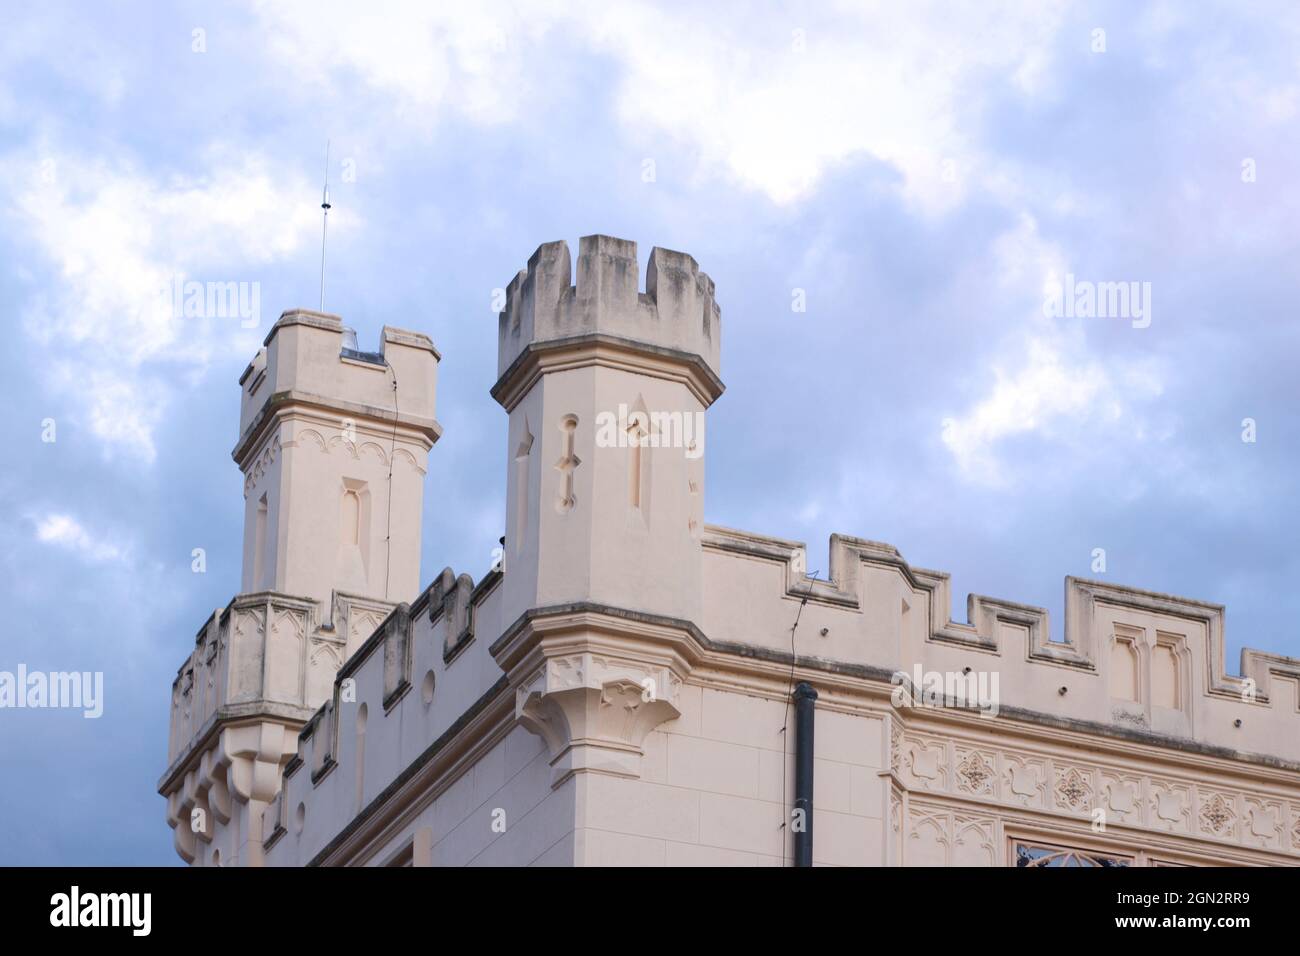 The towers of Lednice castle with sky and clouds. The castle was inscribed on the UNESCO list in 1996. Stock Photo